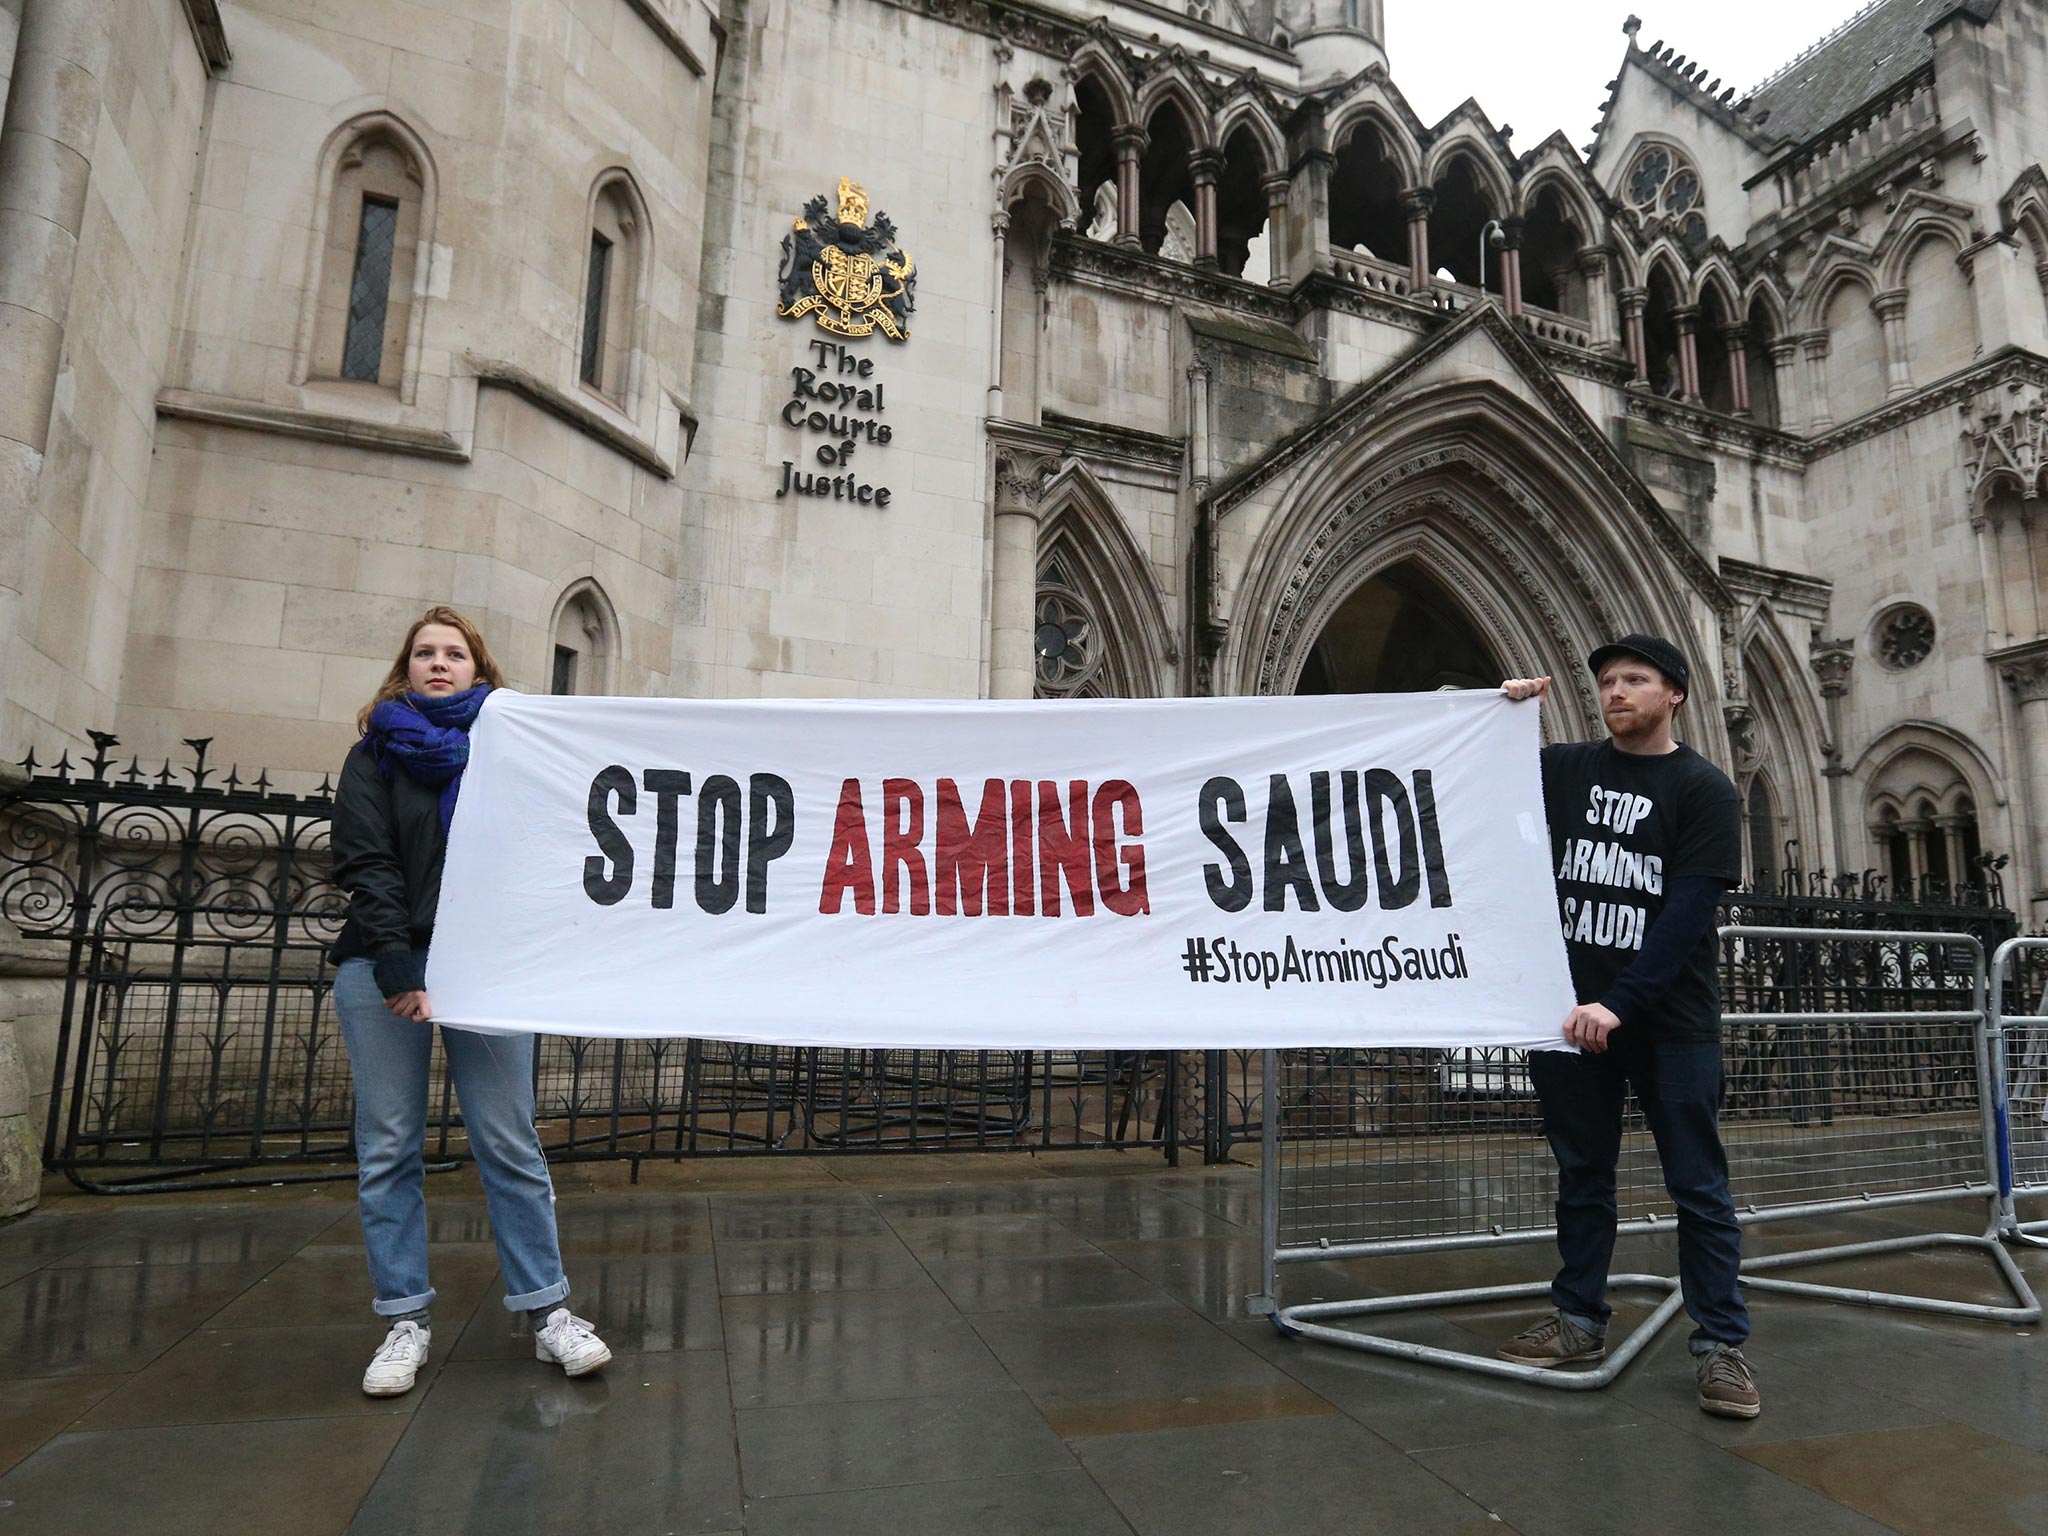 The Campaign Against Arms Trade has accused the Government of unlawfully failing to suspend the sale of UK arms to Saudi Arabia, despite evidence the Gulf state is guilty of 'repeated and serious breaches' of international humanitarian law